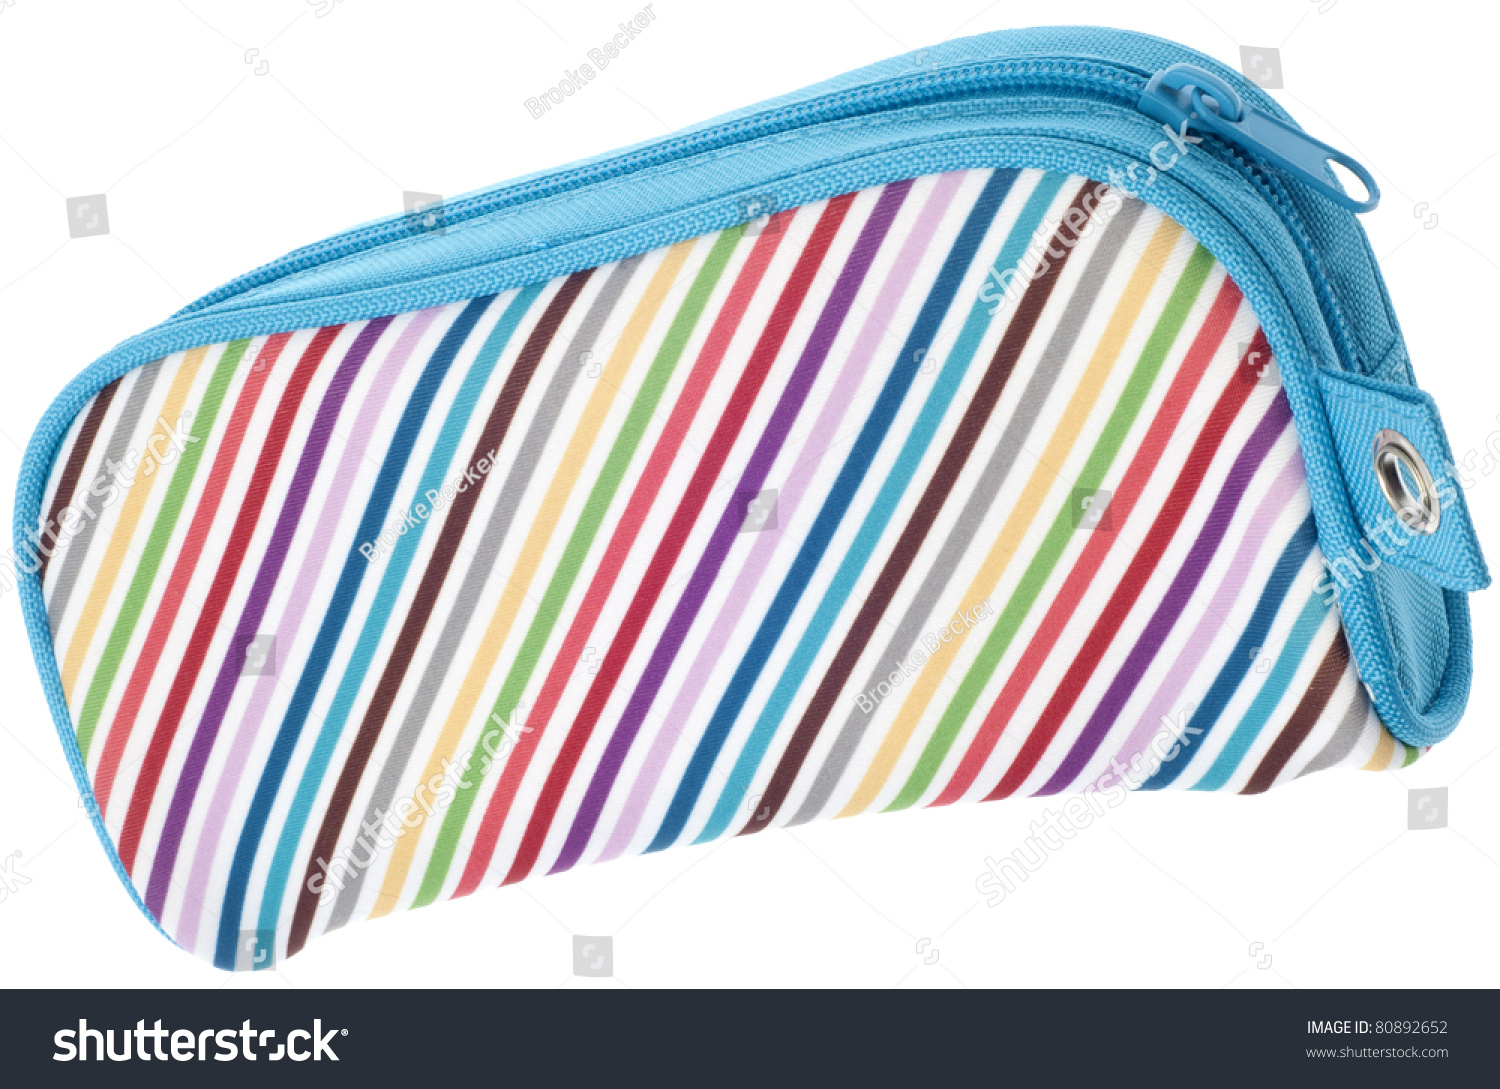 Rainbow Colored Pencil Case Closed Isolated on White with a Clipping Path. #80892652